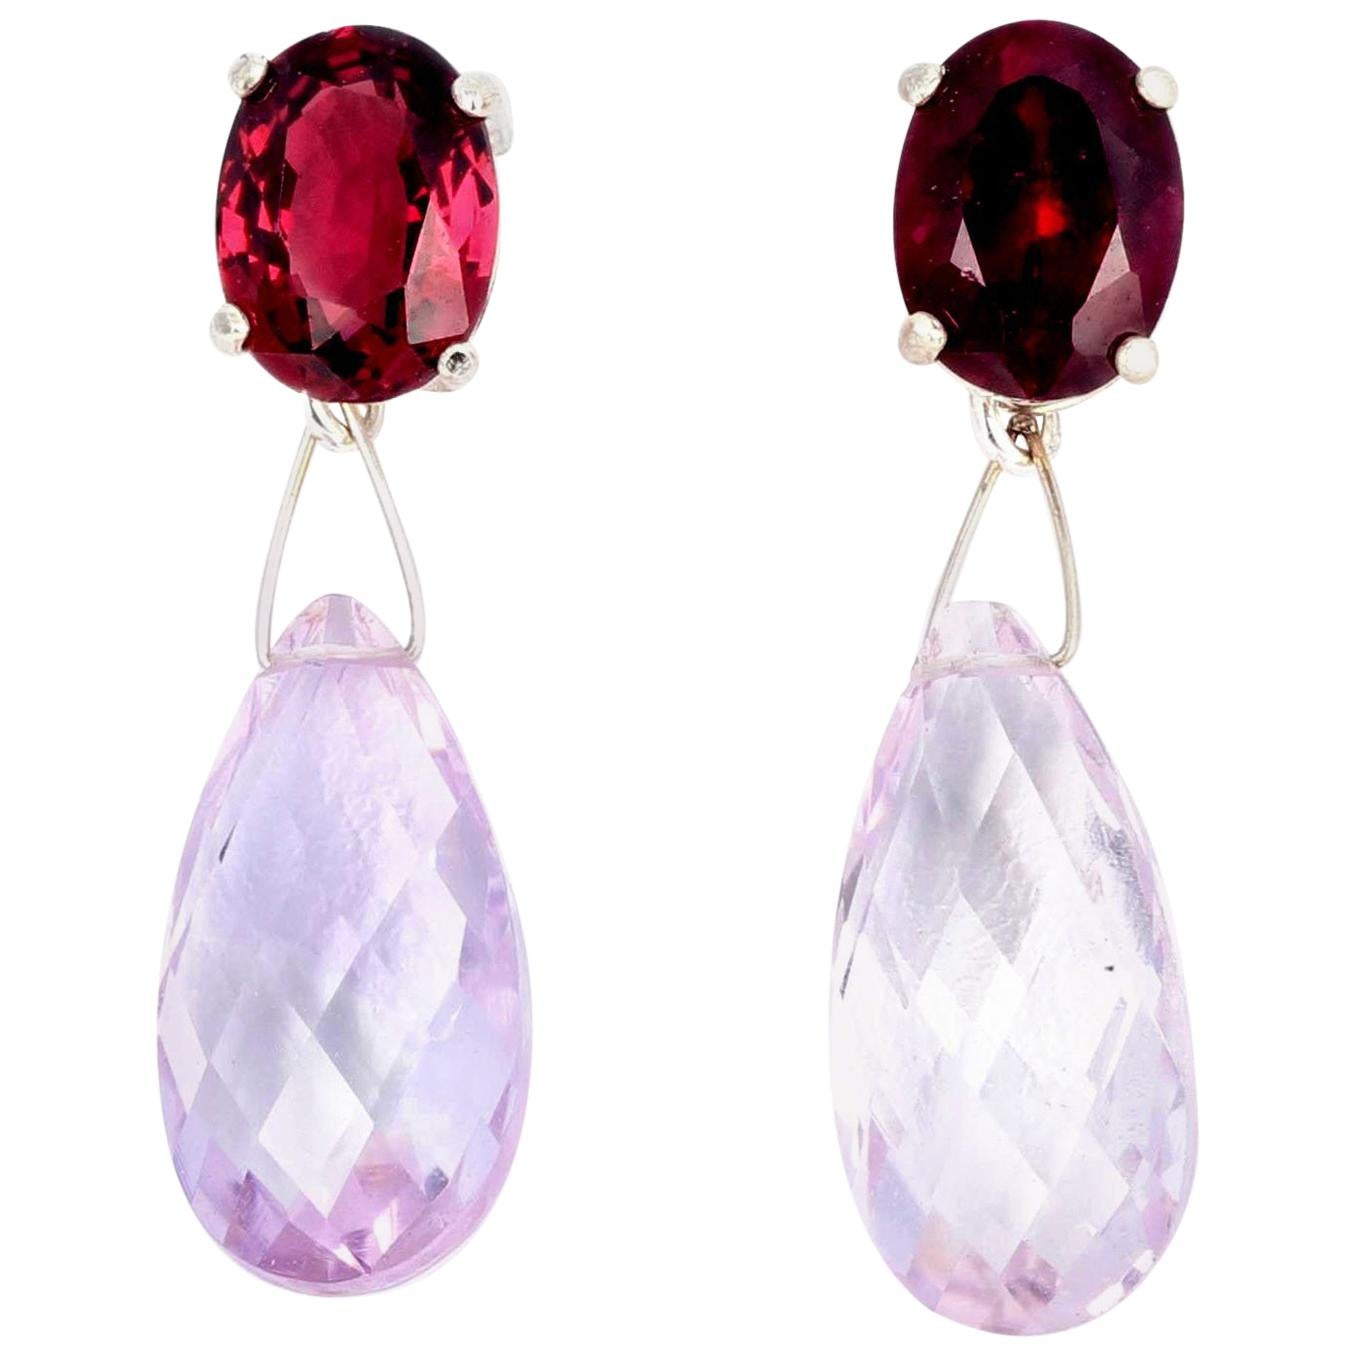 These 5.6 carats of glowing red MATCHING Rubelites (red Tourmalines)  (10 mm x 8 mm) elegantly dangle brilliant 9.8 carats of checkerboard gem cut Rose of France Amethysts.  They hang approximately 1.14 inches long from top of Rubelite to bottom of